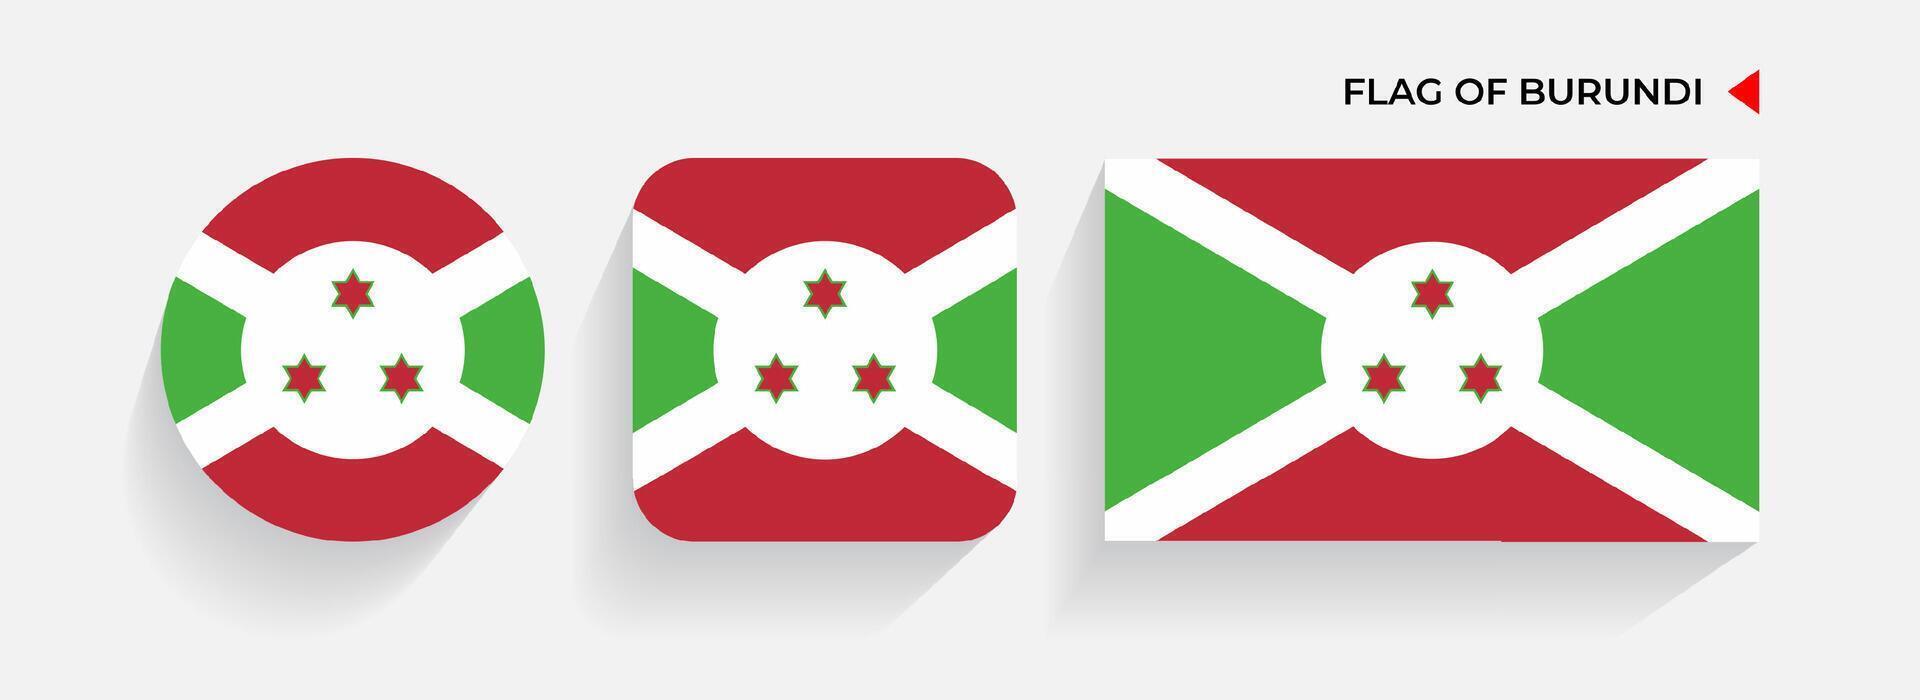 Burundi Flags arranged in round, square and rectangular shapes vector